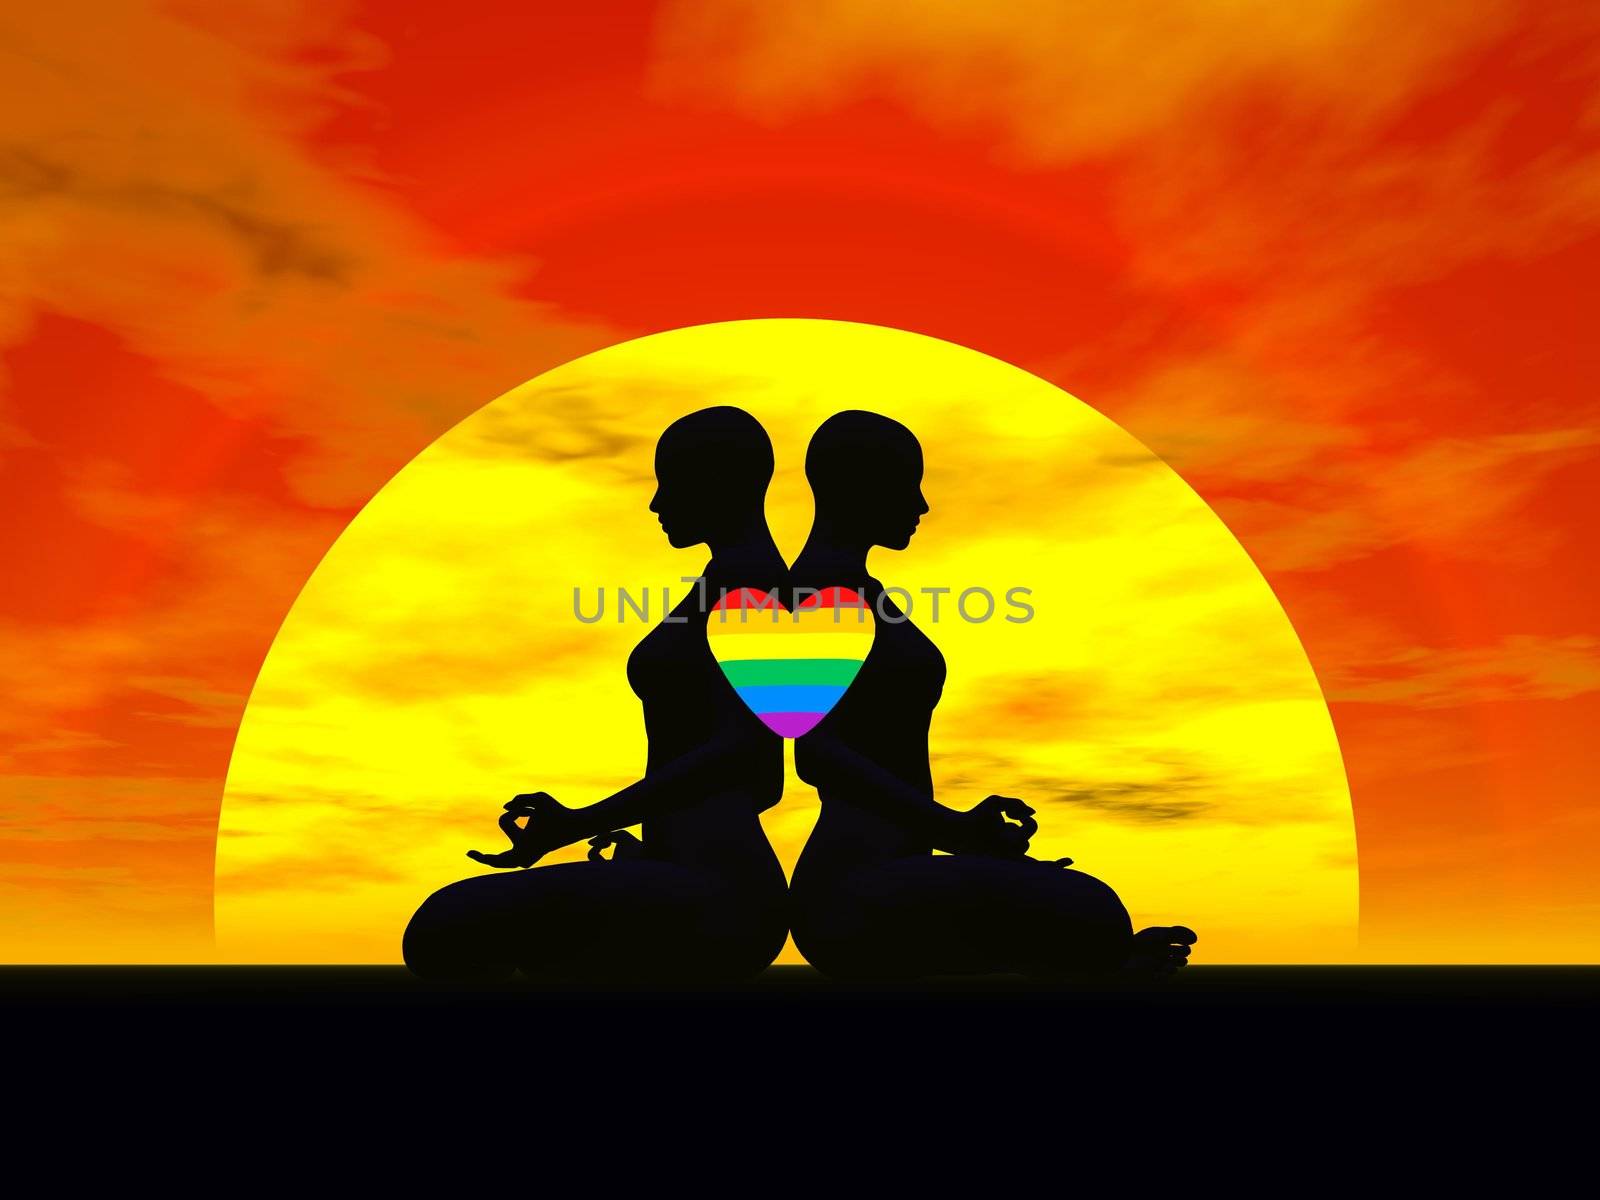 Shadow of two women back to back in lotus meditating posture by sunset, one rainbow color heart upon them